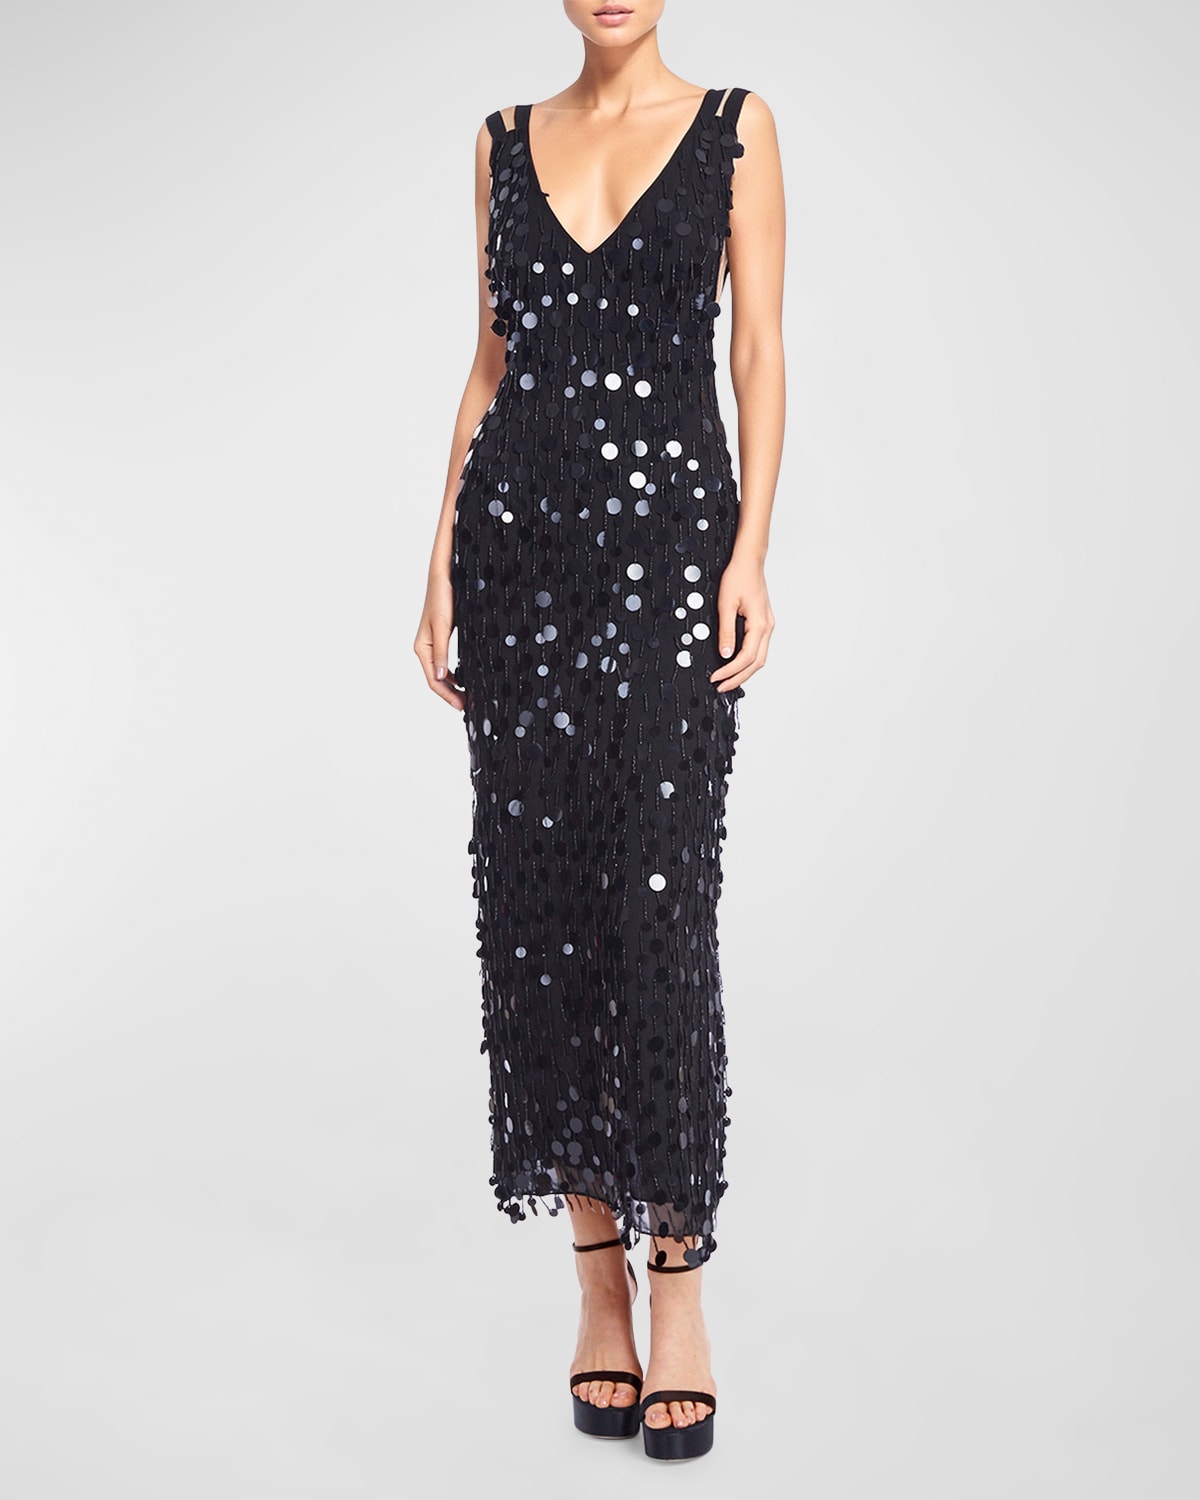 ONE33 SOCIAL STRAPPY LOW-BACK BEAD & SEQUIN MIDI DRESS